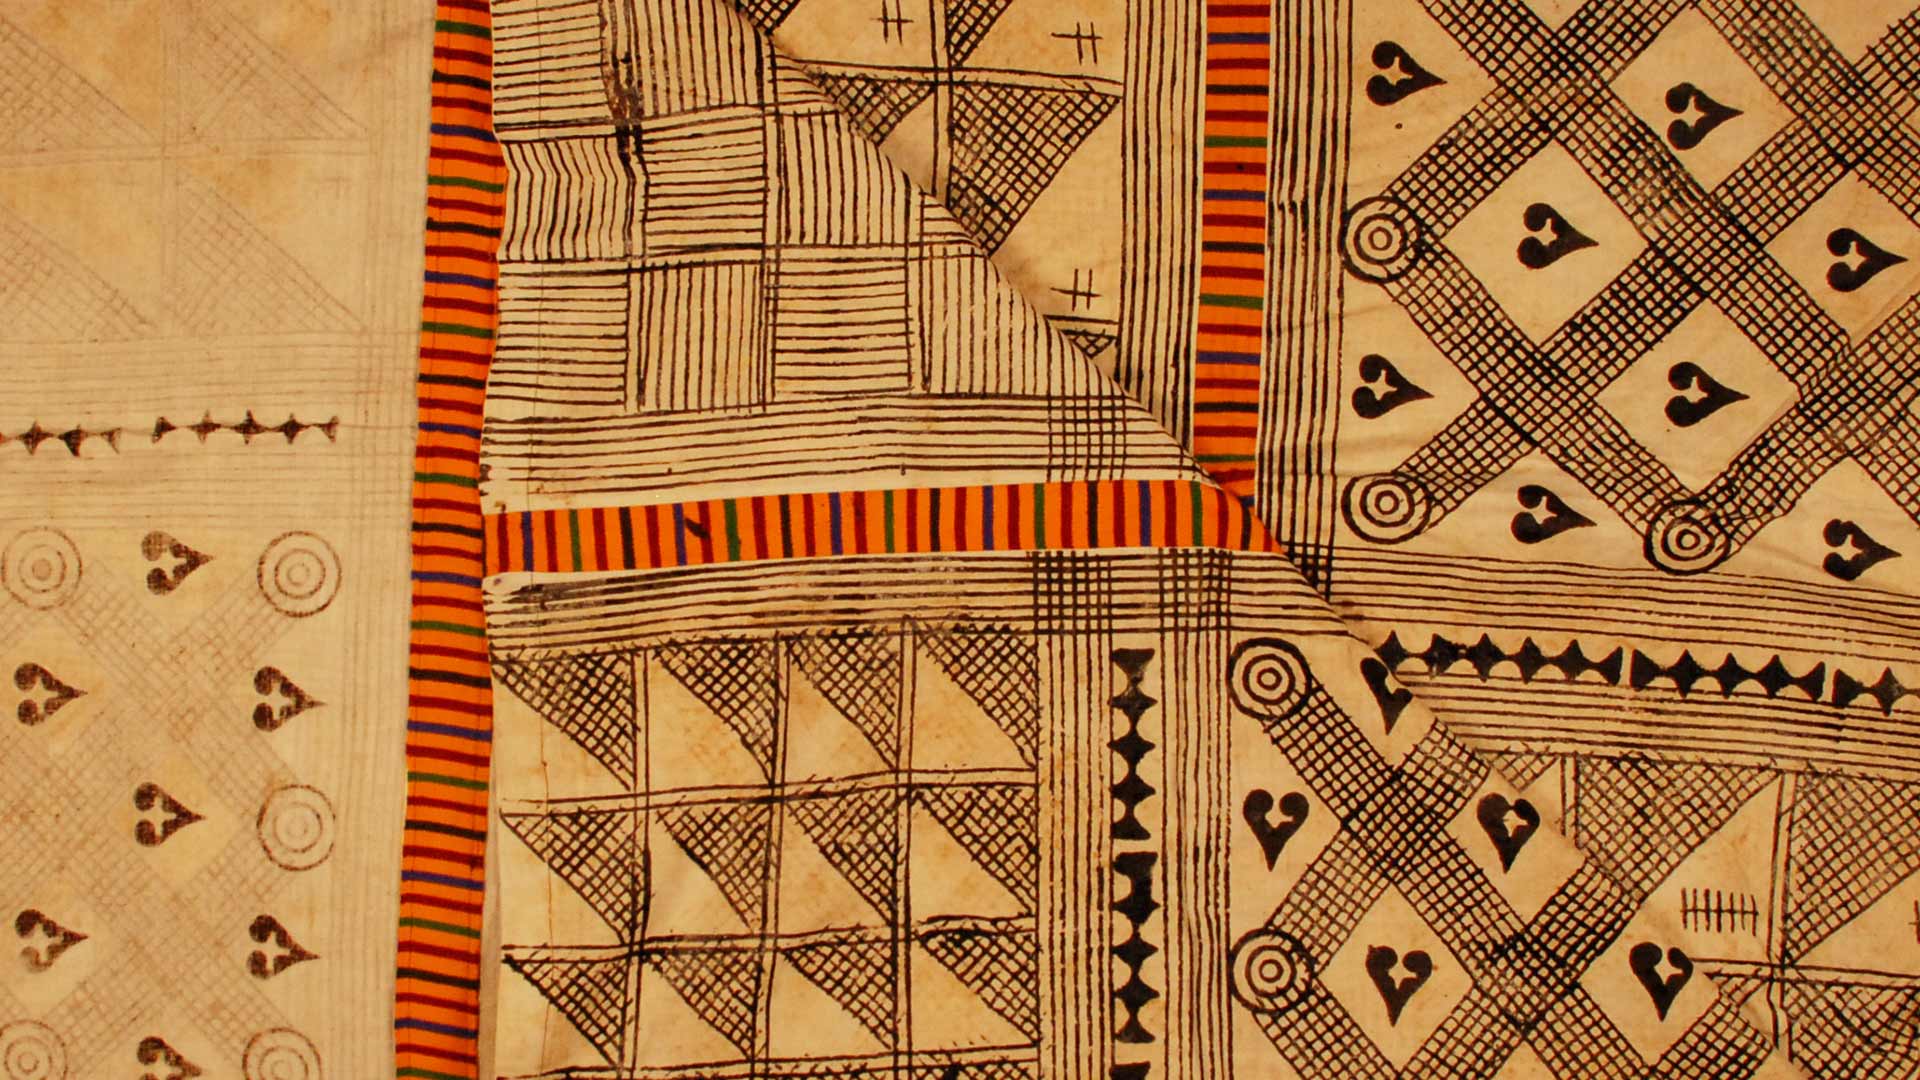 a fabric painting with crisscross patterns drawn in black, bordered with orange patterns